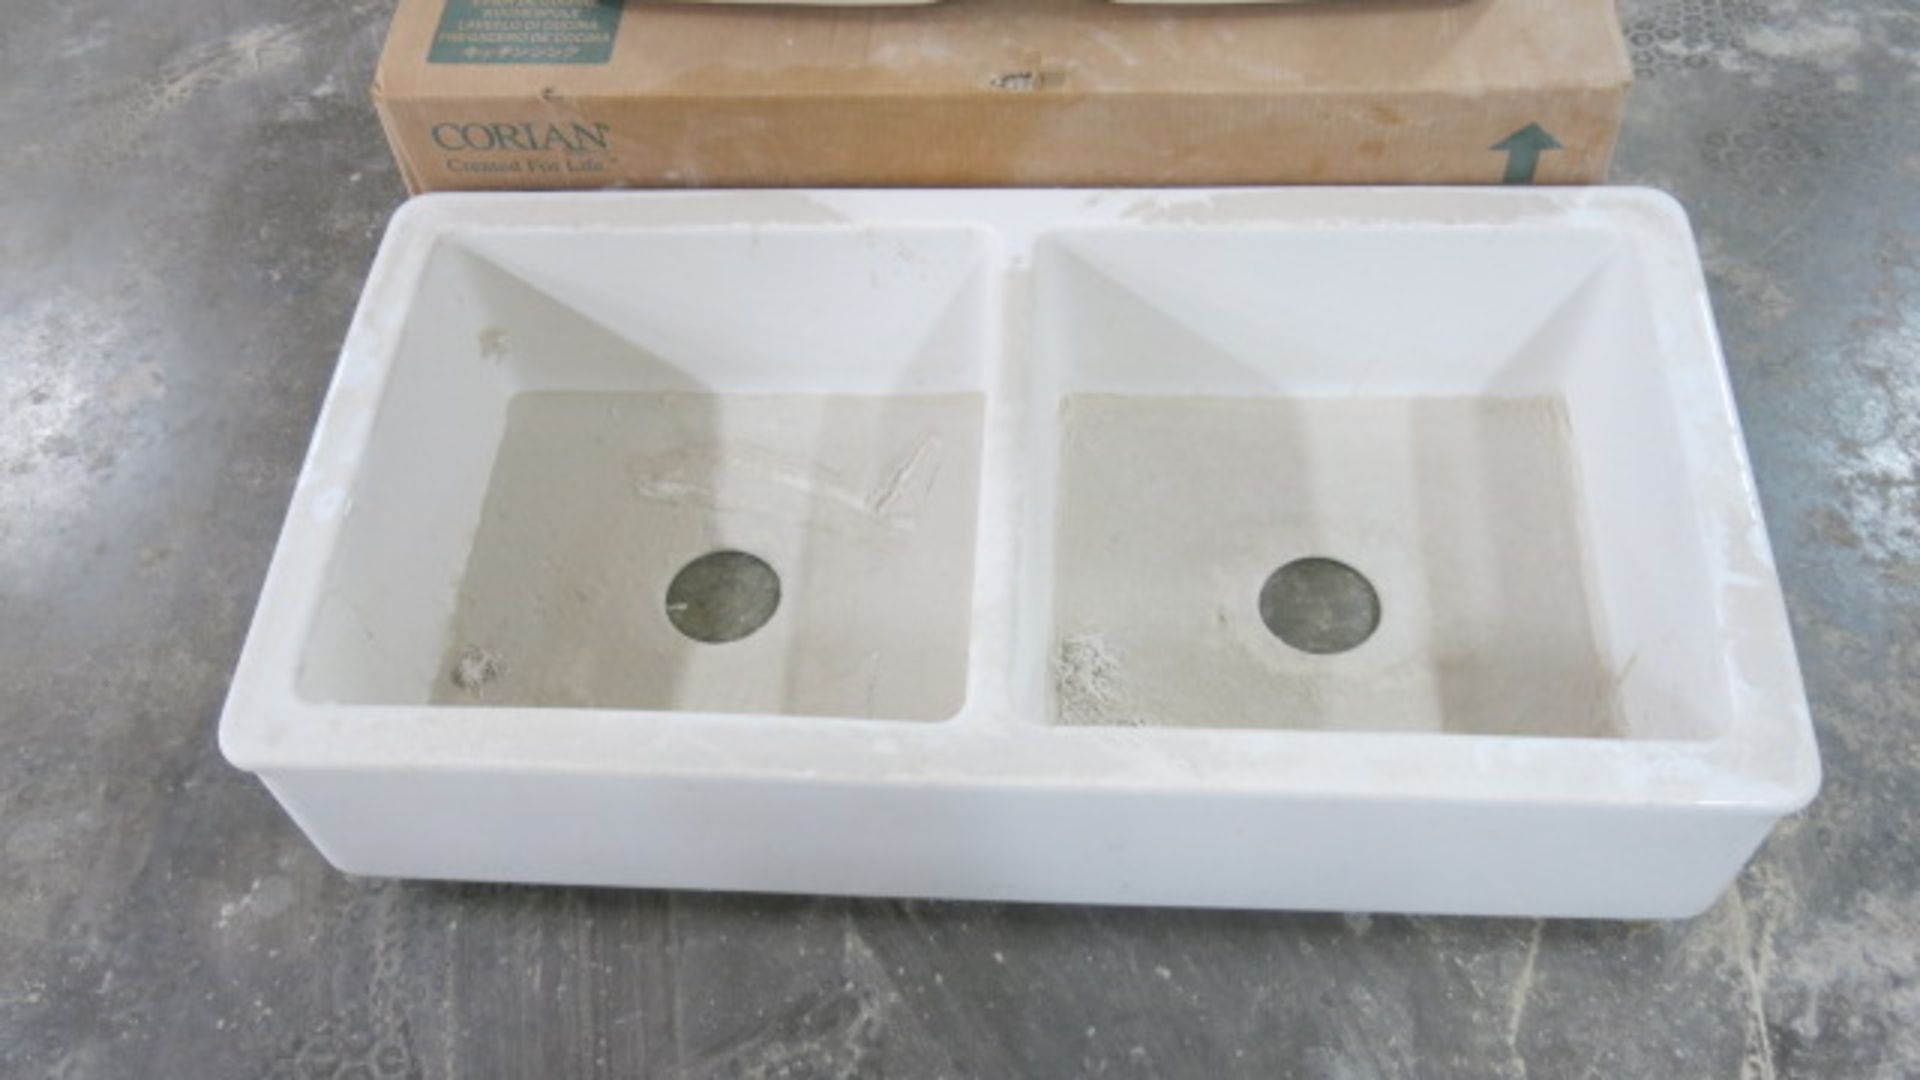 LOT OF (2) STONE SINKS - Image 2 of 5